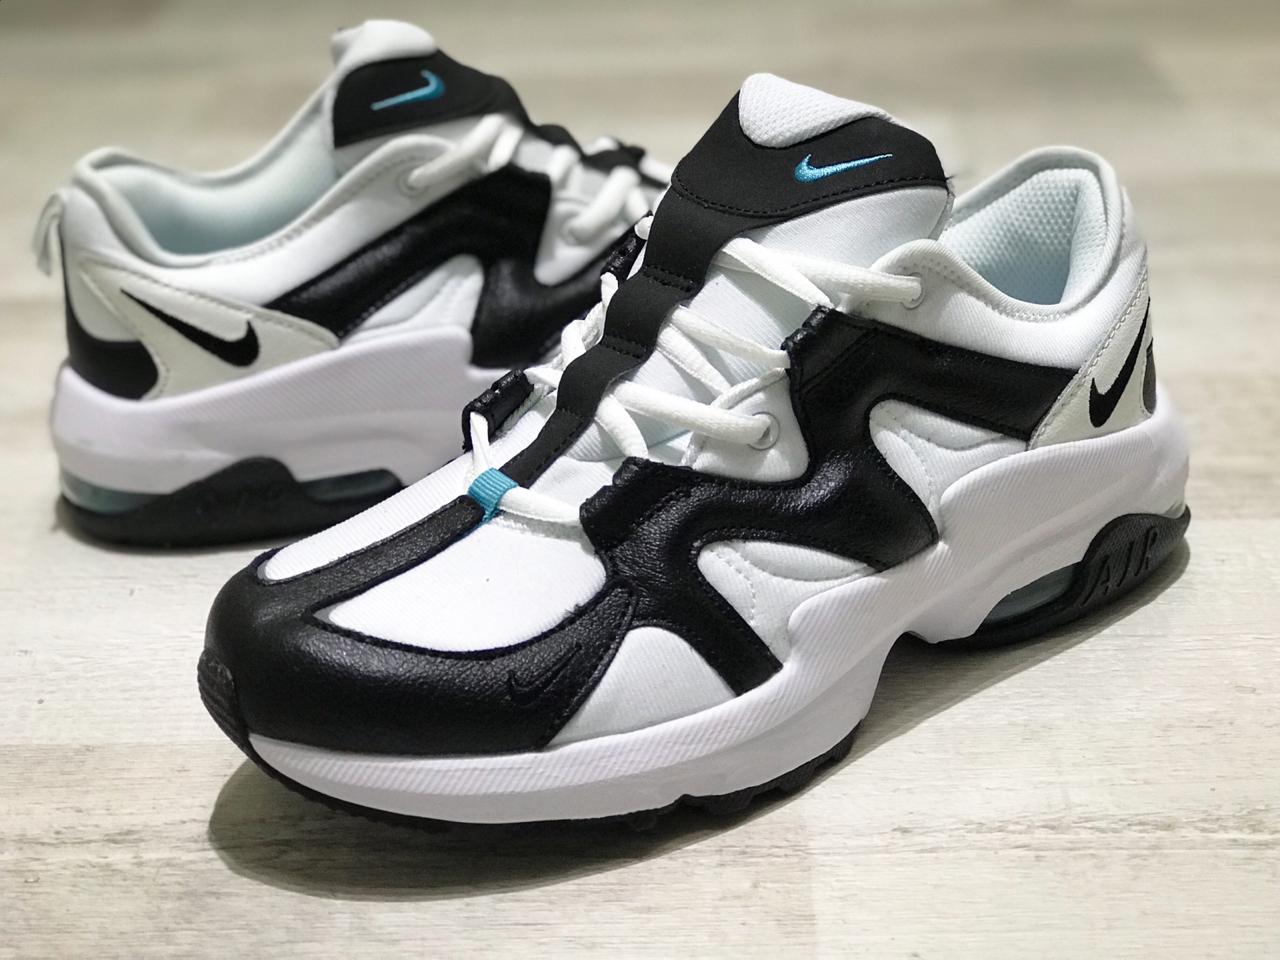 cheapest place to buy nike air max